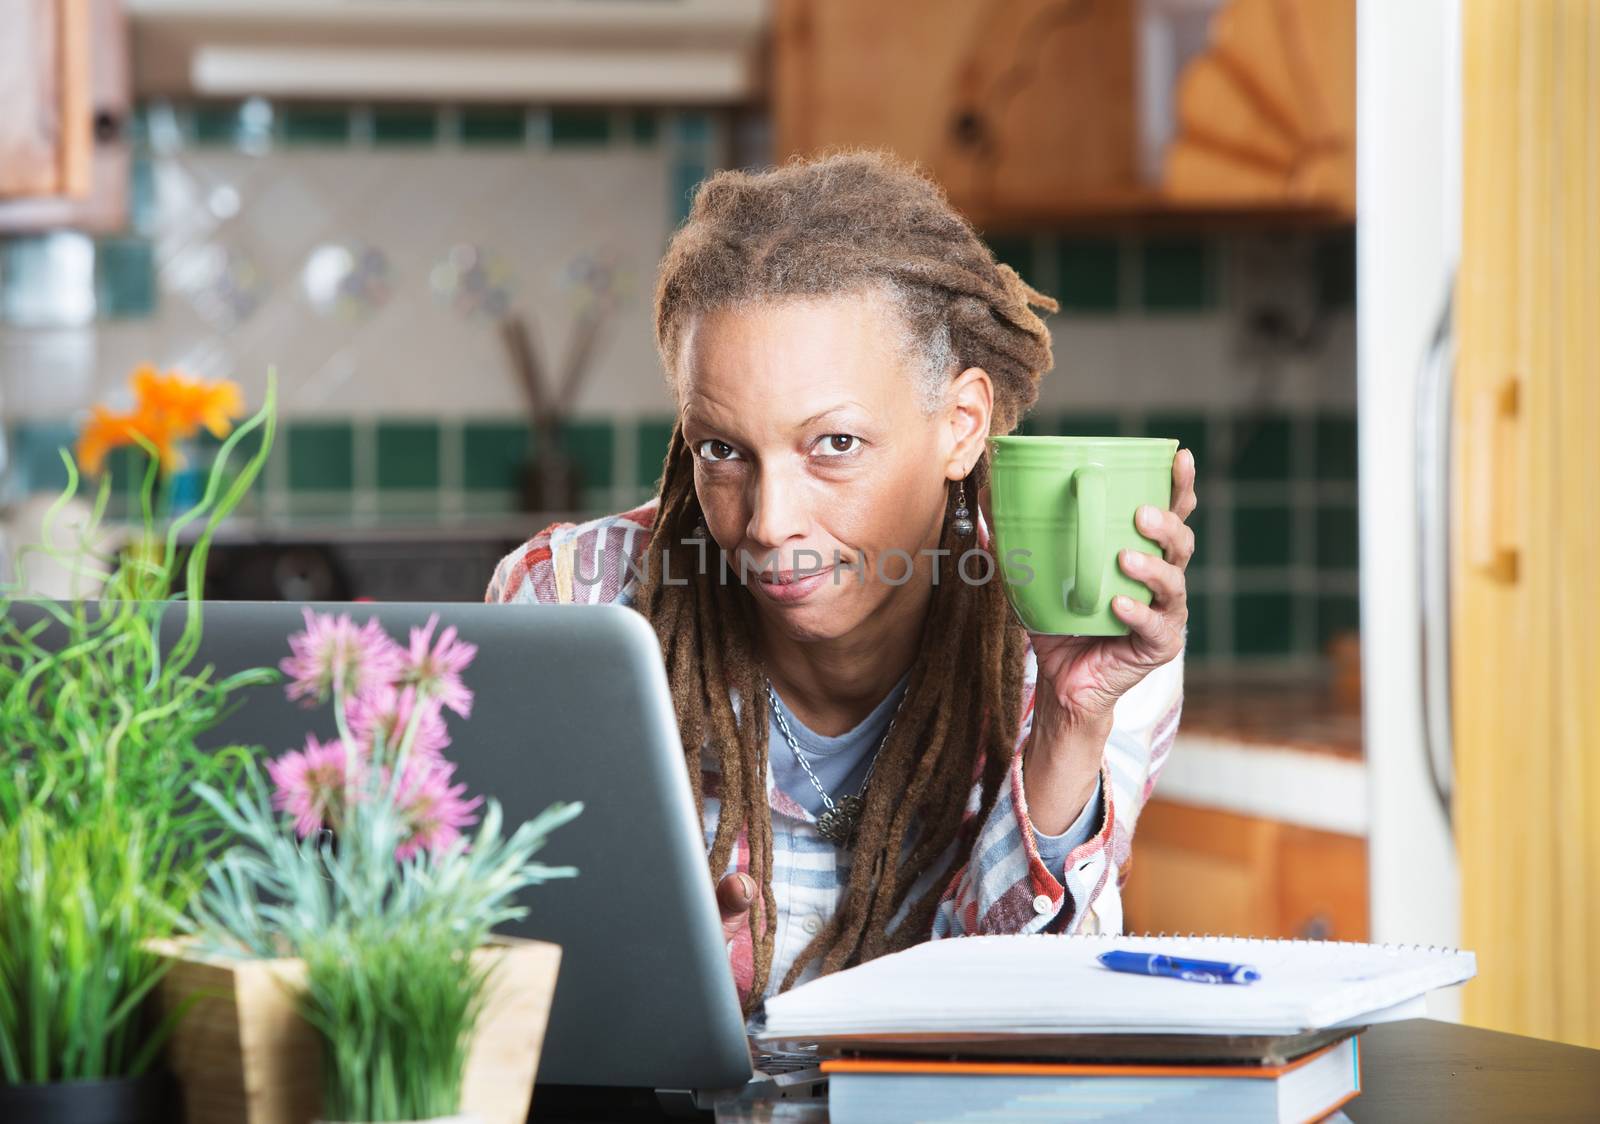 Grinning woman in kitchen with homework and laptop by Creatista